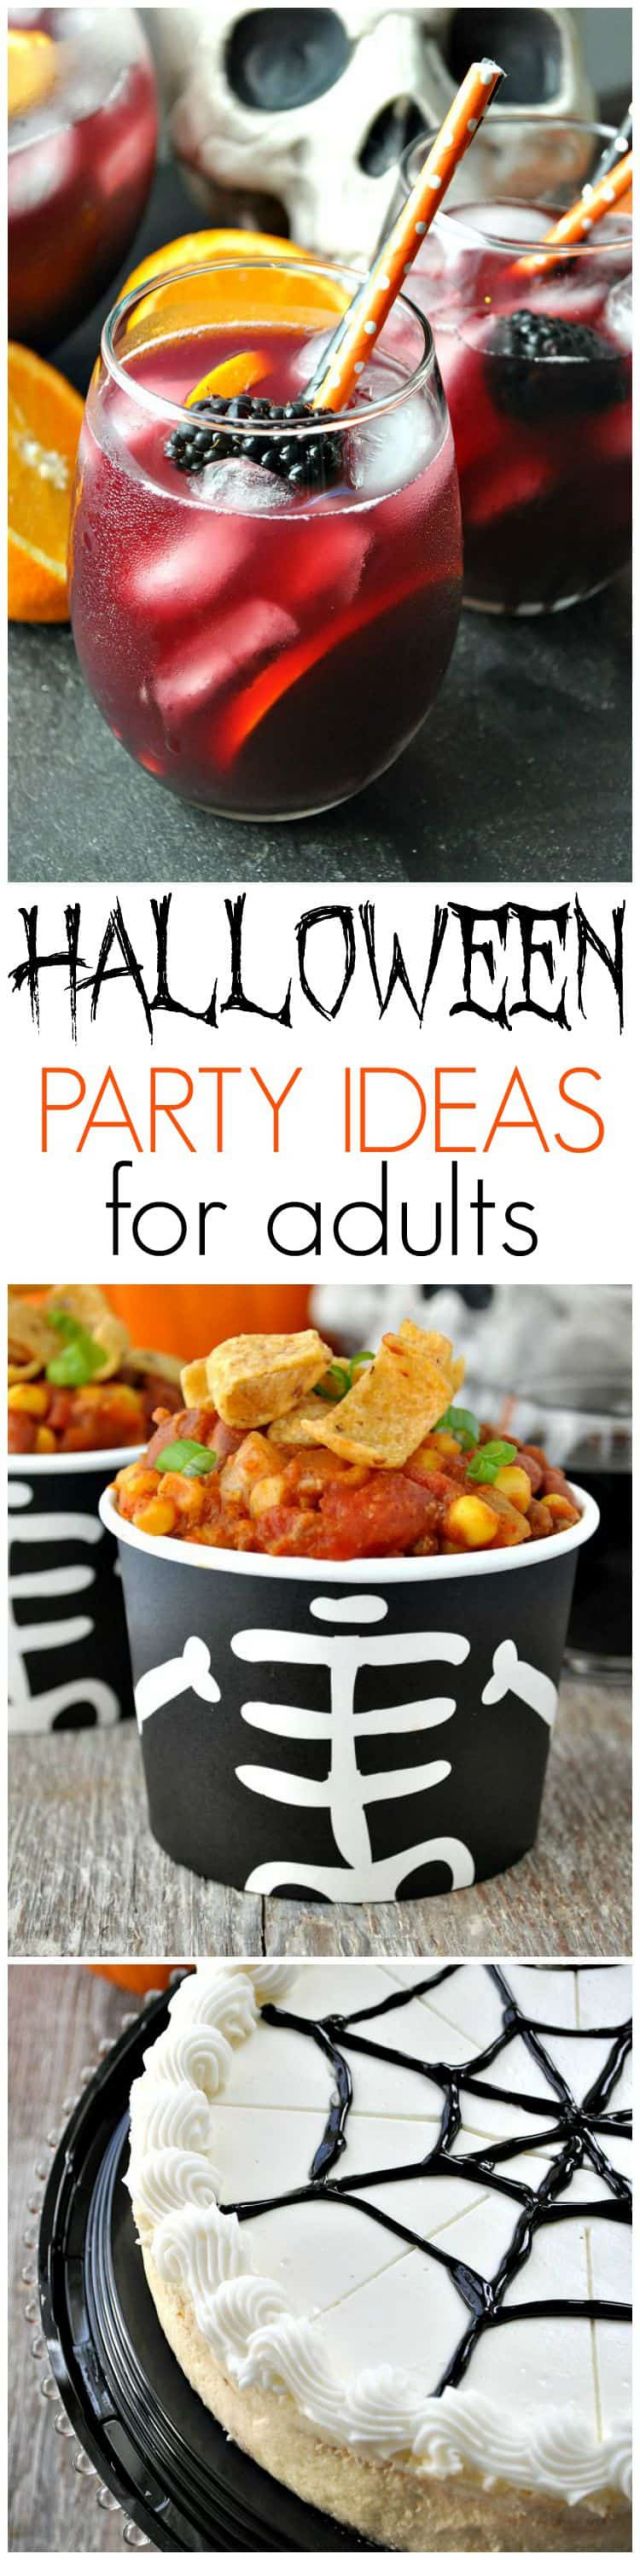 Halloween Party Menu Ideas For Adults
 Slow Cooker Pumpkin Chili Halloween Party Ideas for